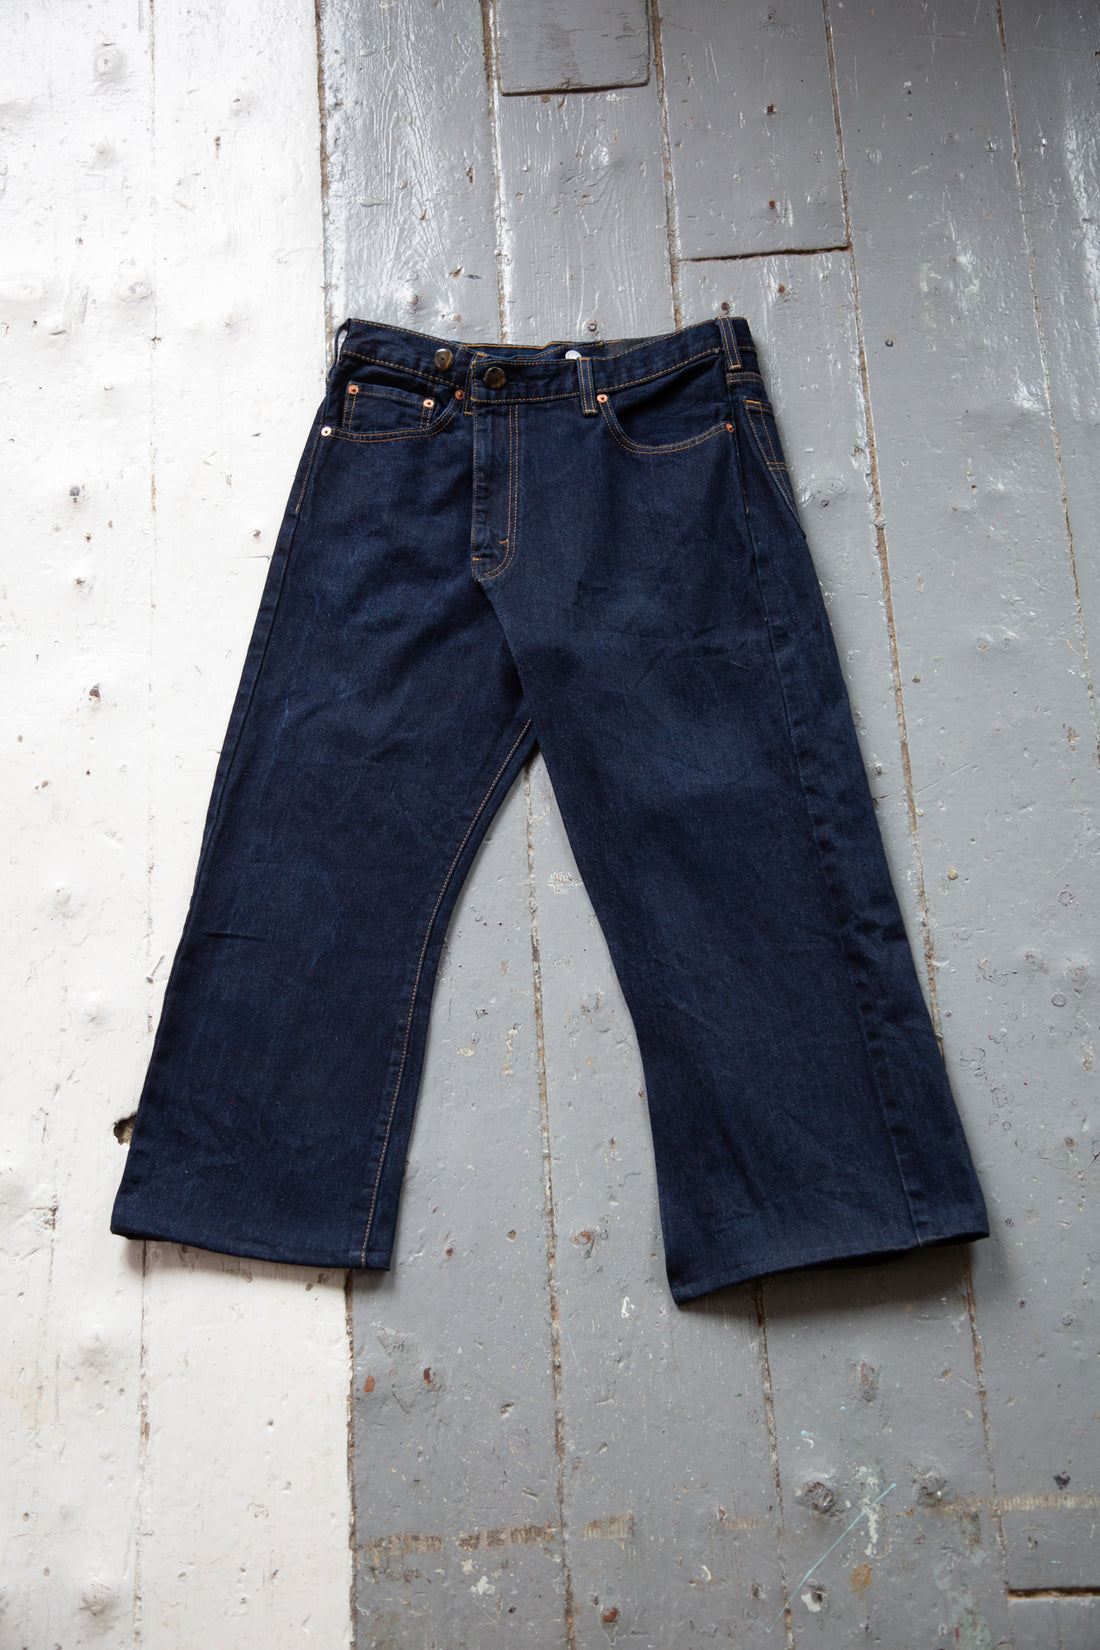 reconstructed Levi jeans